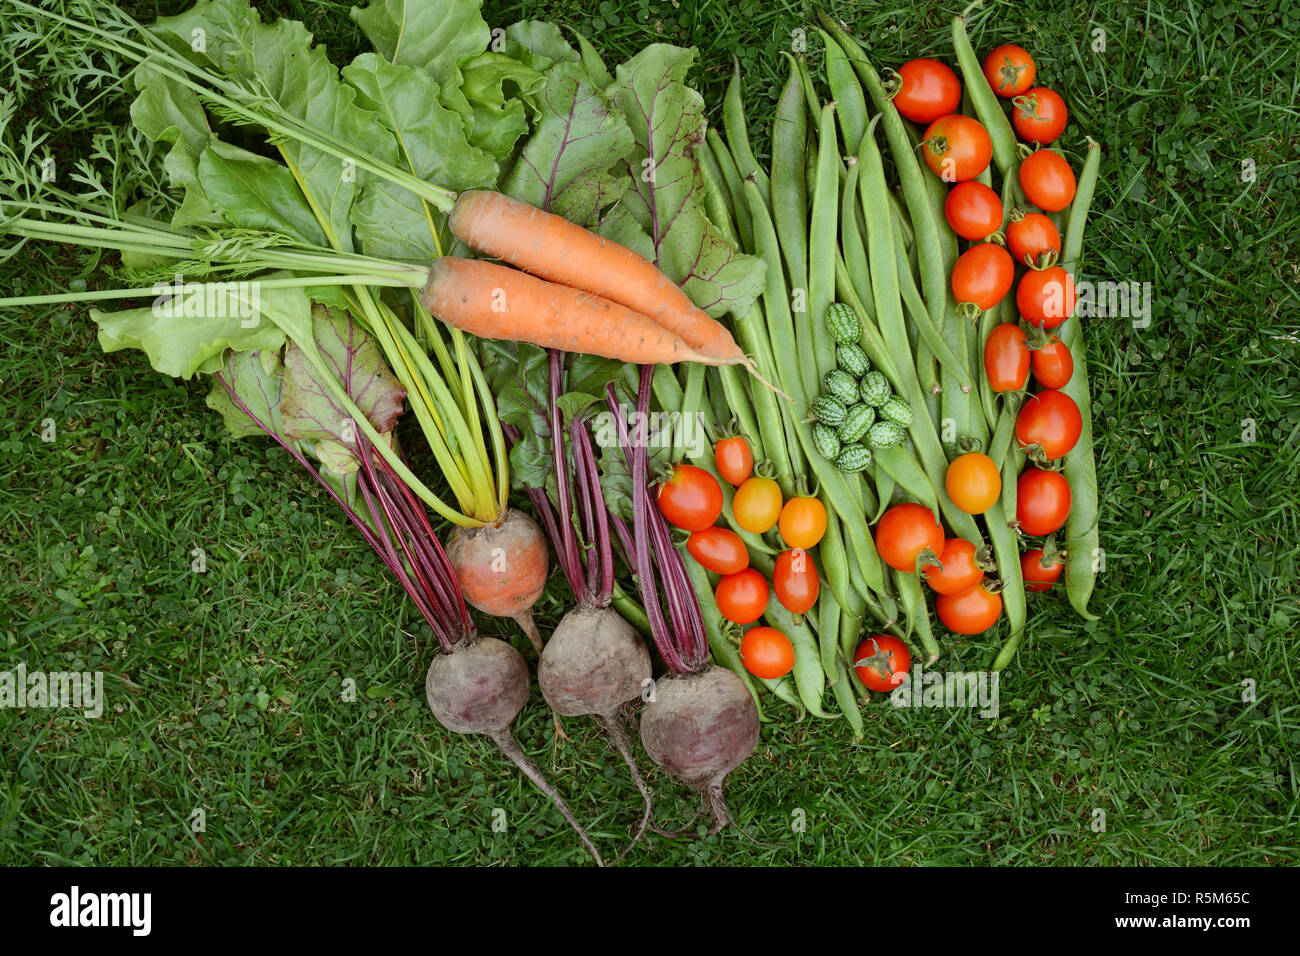 Selection of fresh produce from vegetable garden Stock Photo